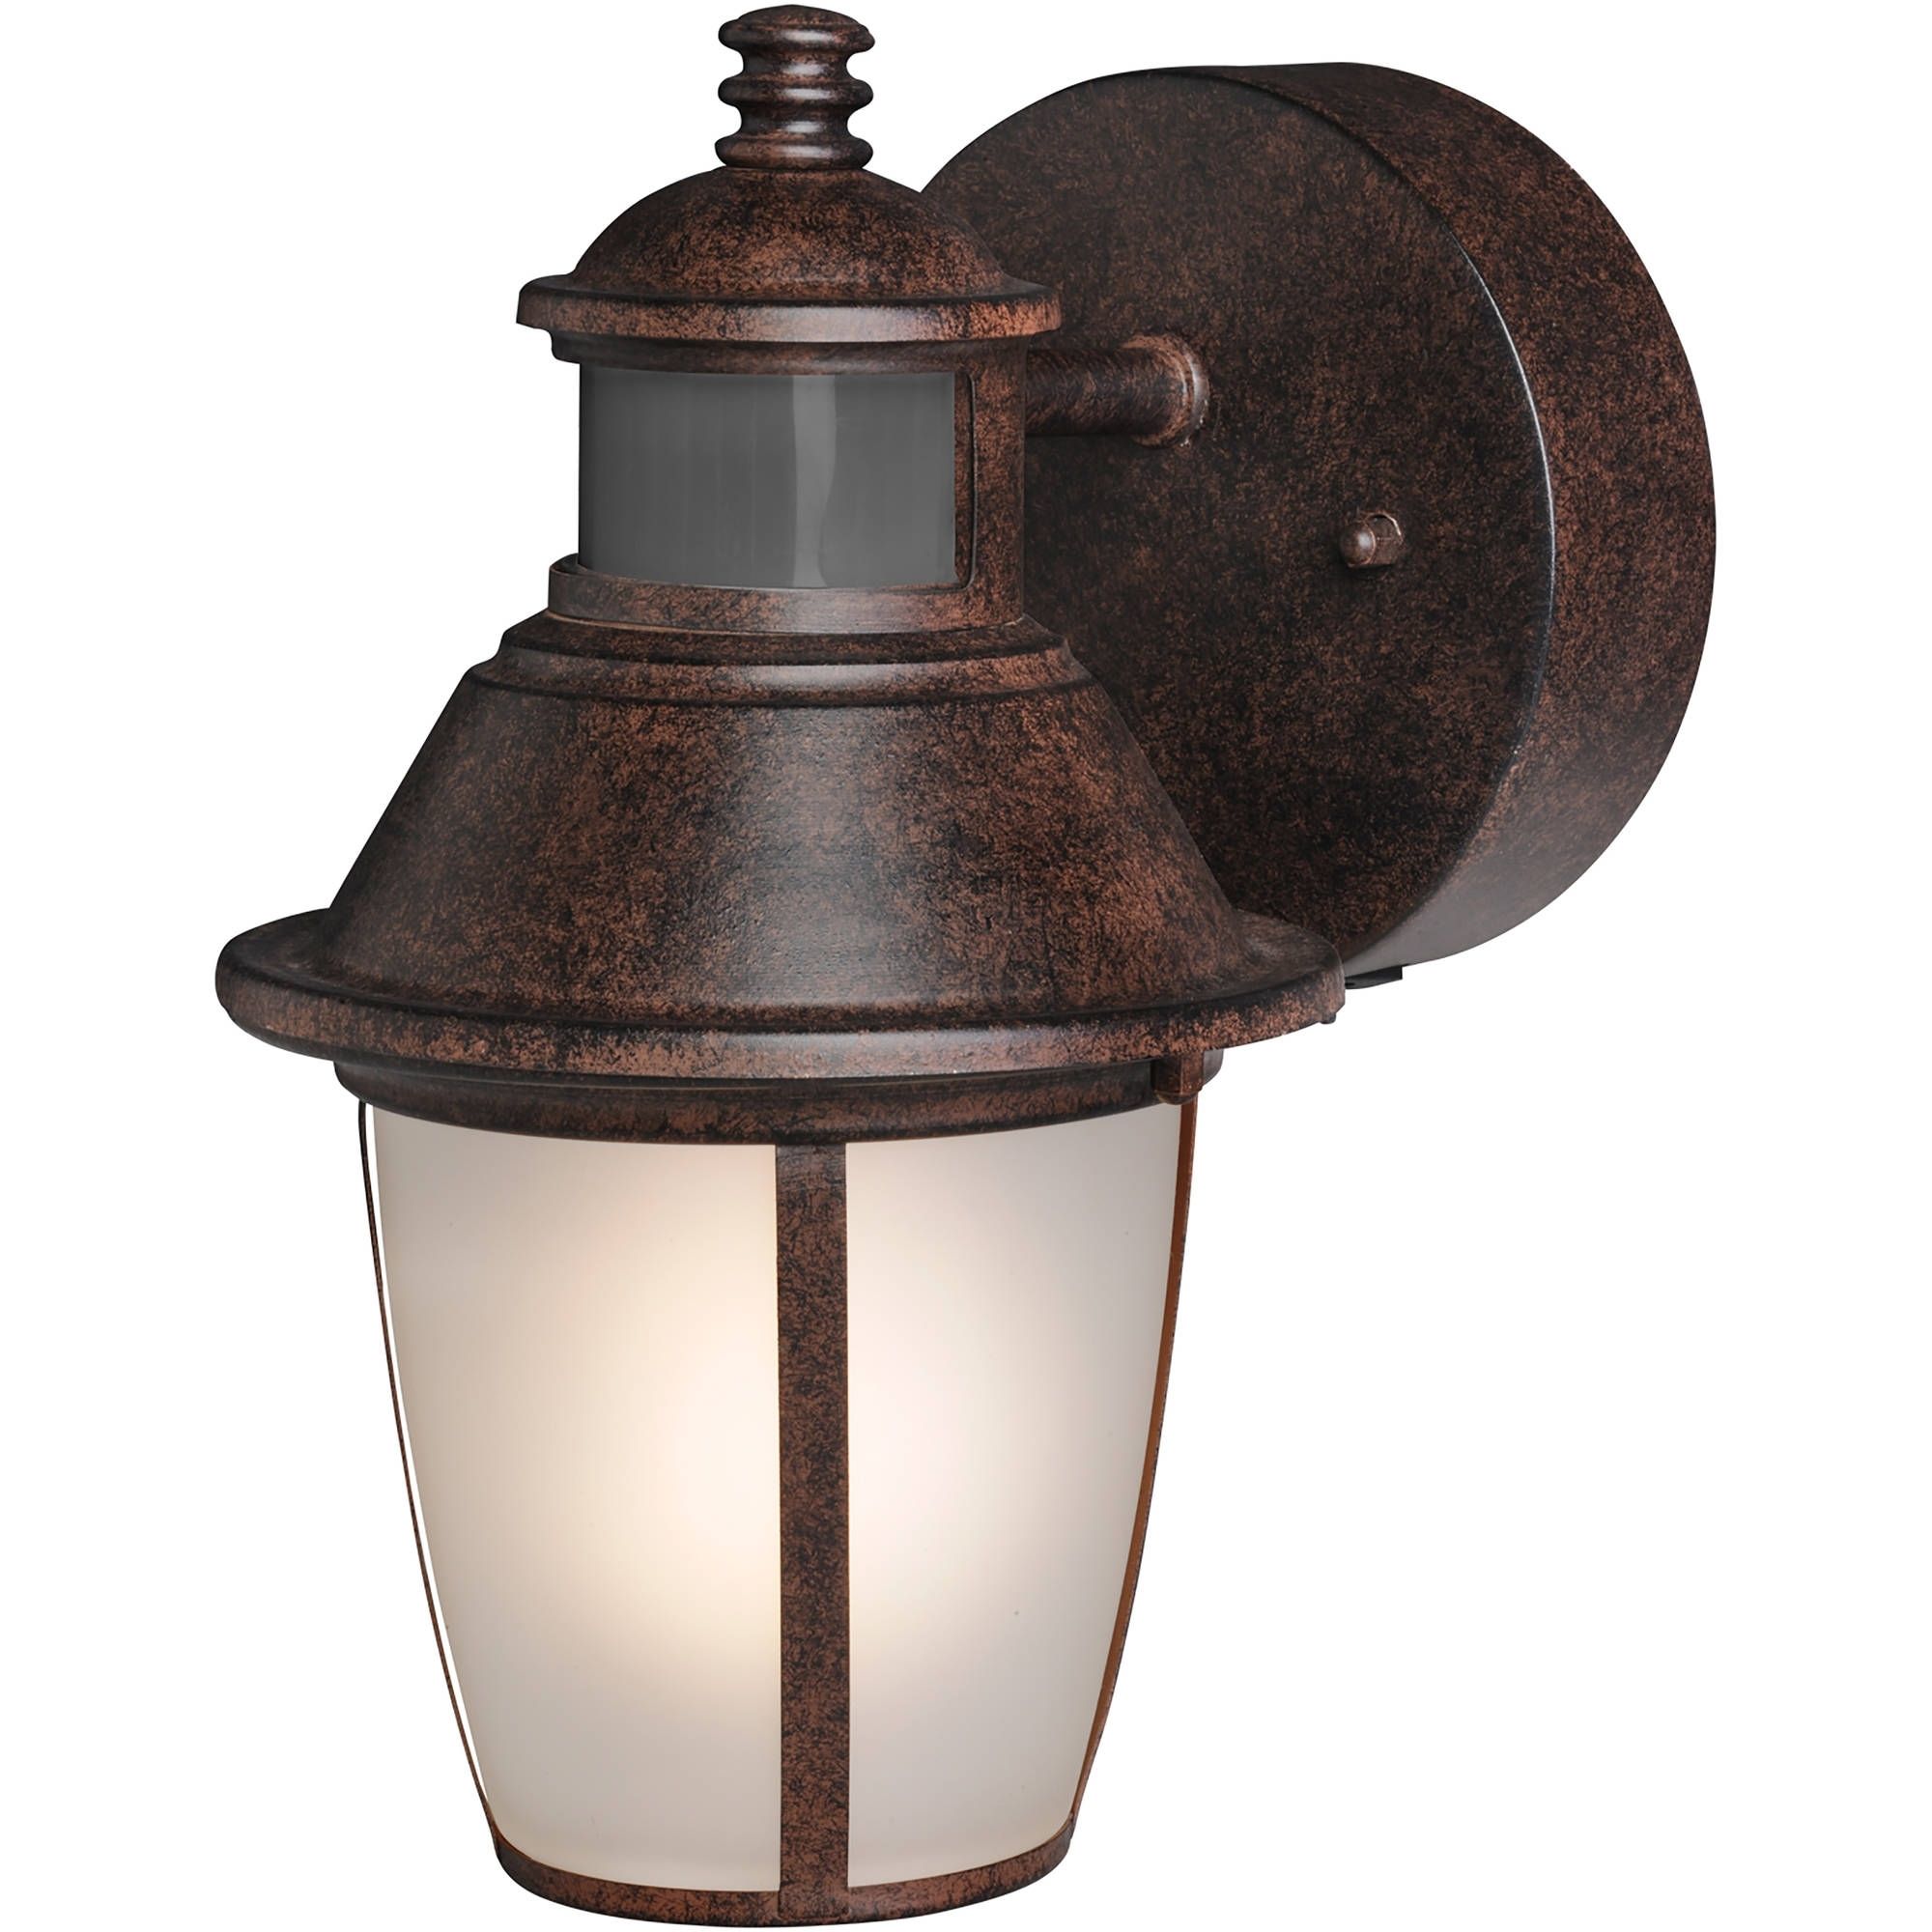 Brink's Led Outdoor Wall Lantern Motion Security Light, Bronze For Well Liked Outdoor Wall Lighting At Walmart (Photo 1 of 20)